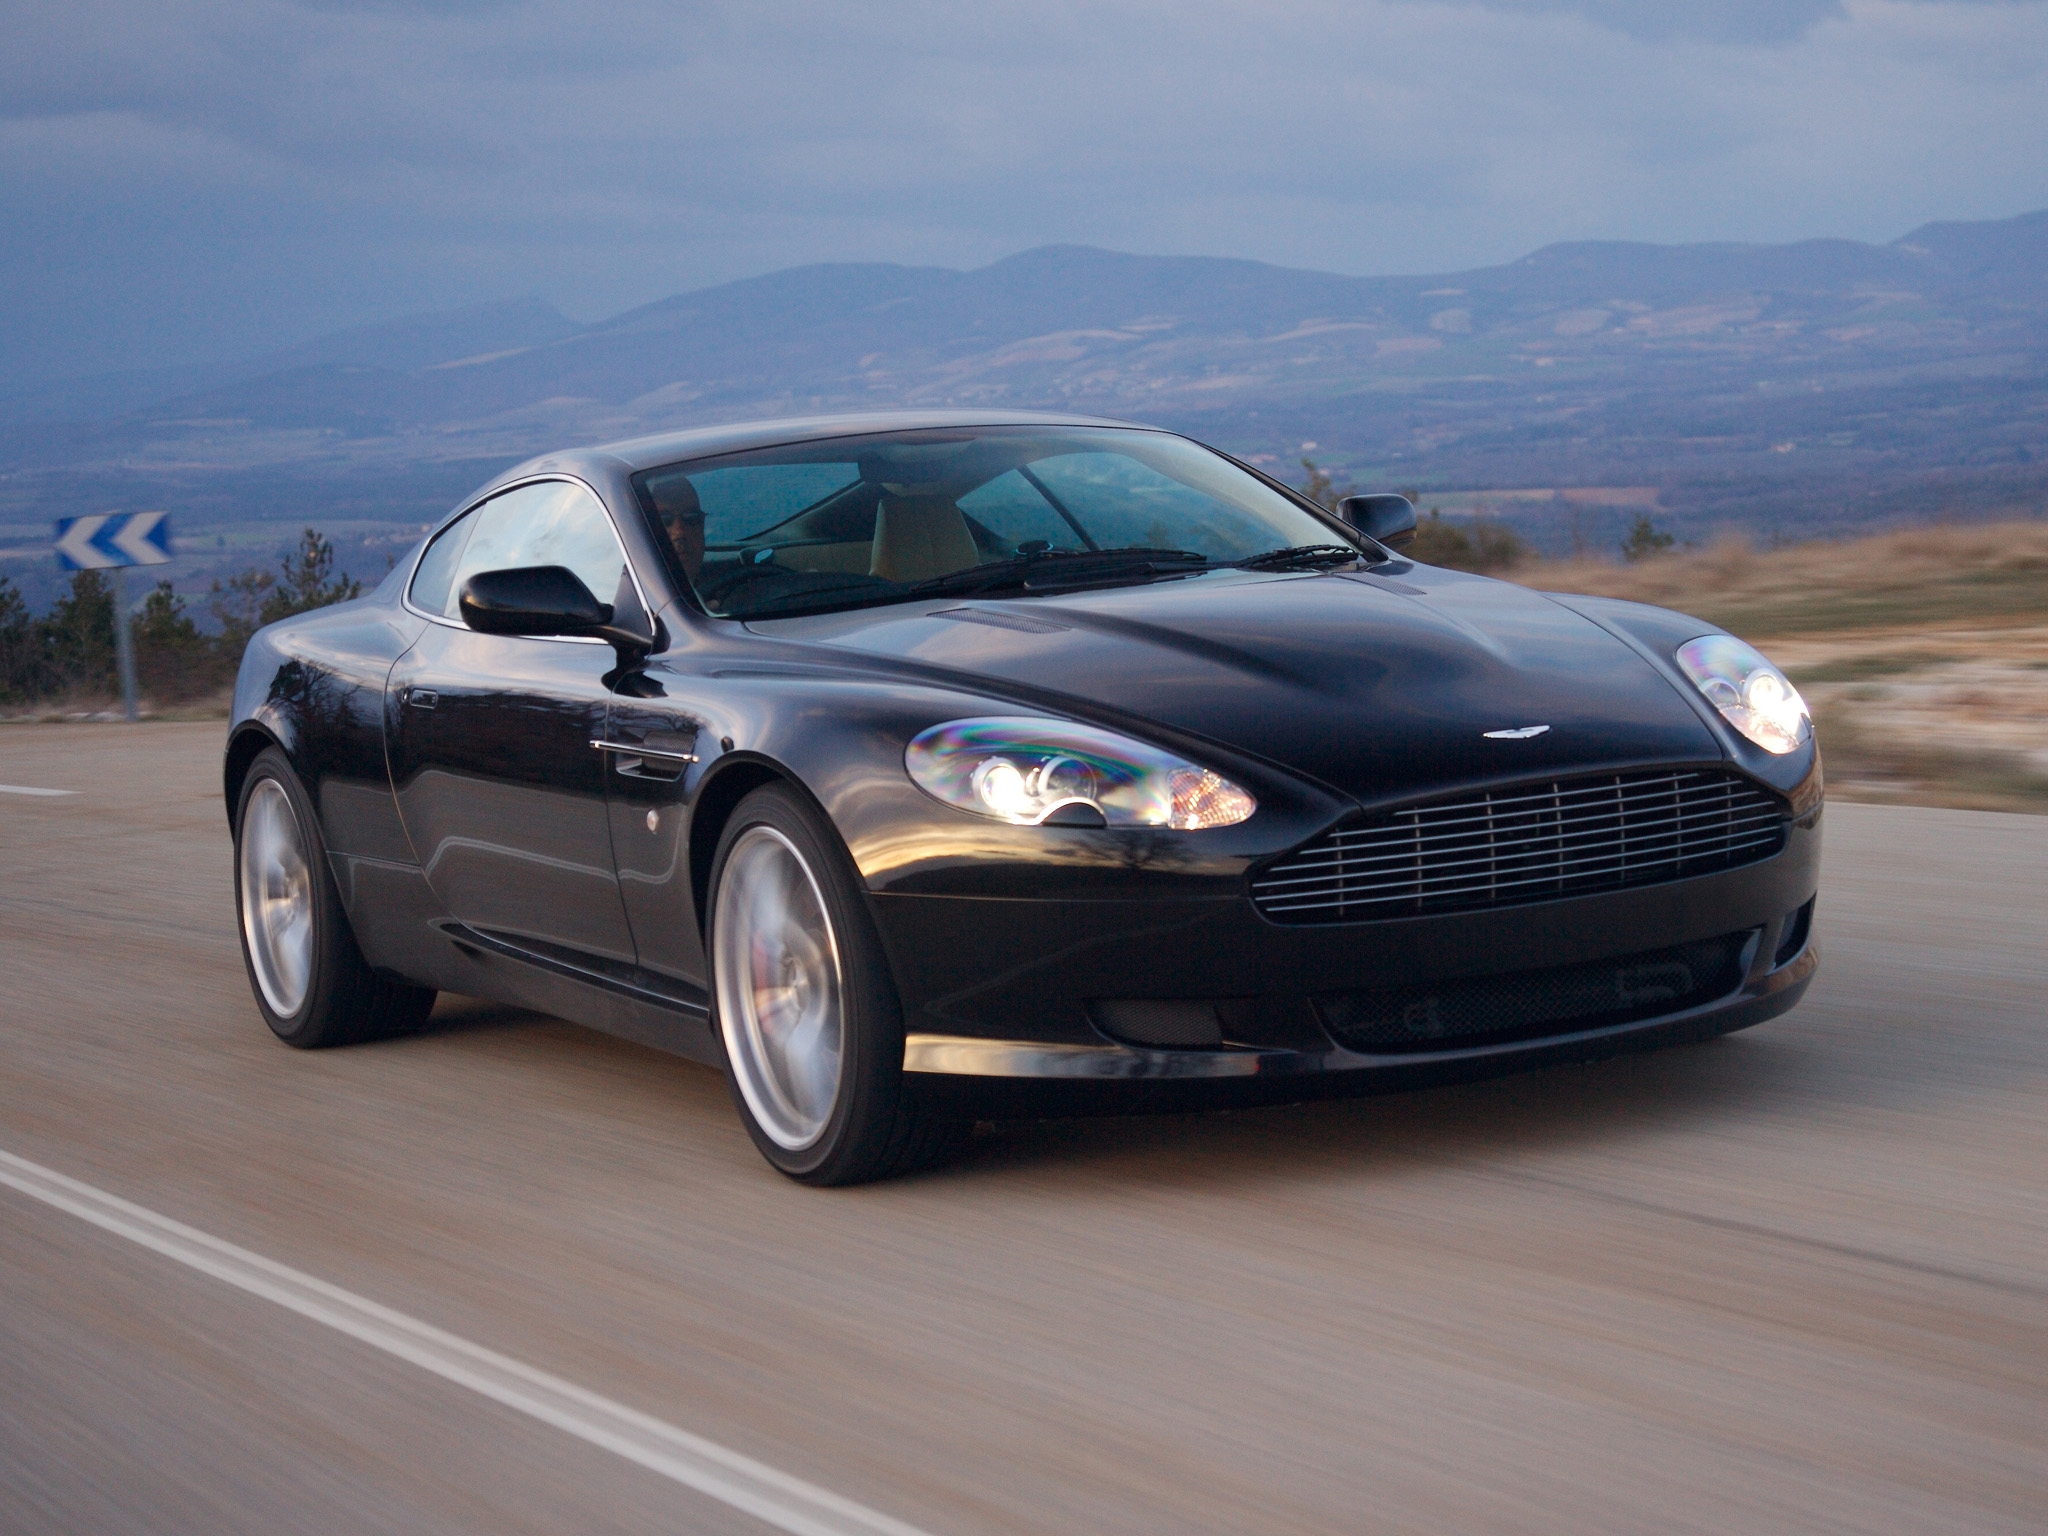 58980 download wallpaper sports, auto, nature, mountains, aston martin, cars, blue, asphalt, front view, speed, style, db9, 2006 screensavers and pictures for free